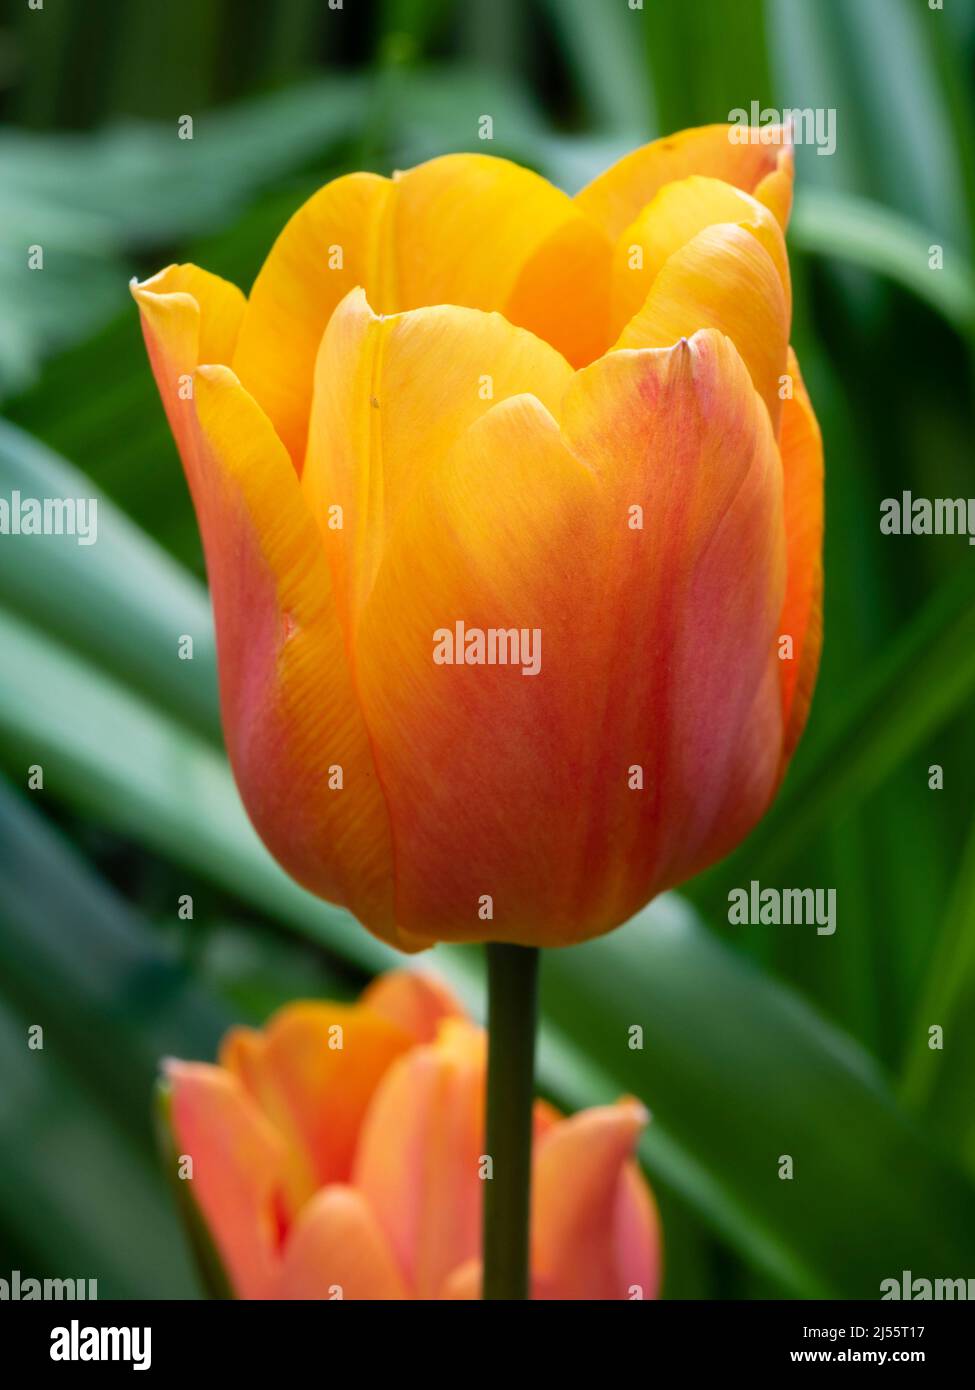 Flower of the spring blooming red and orange Triumph tulip, Tulip 'King's Orange' Stock Photo